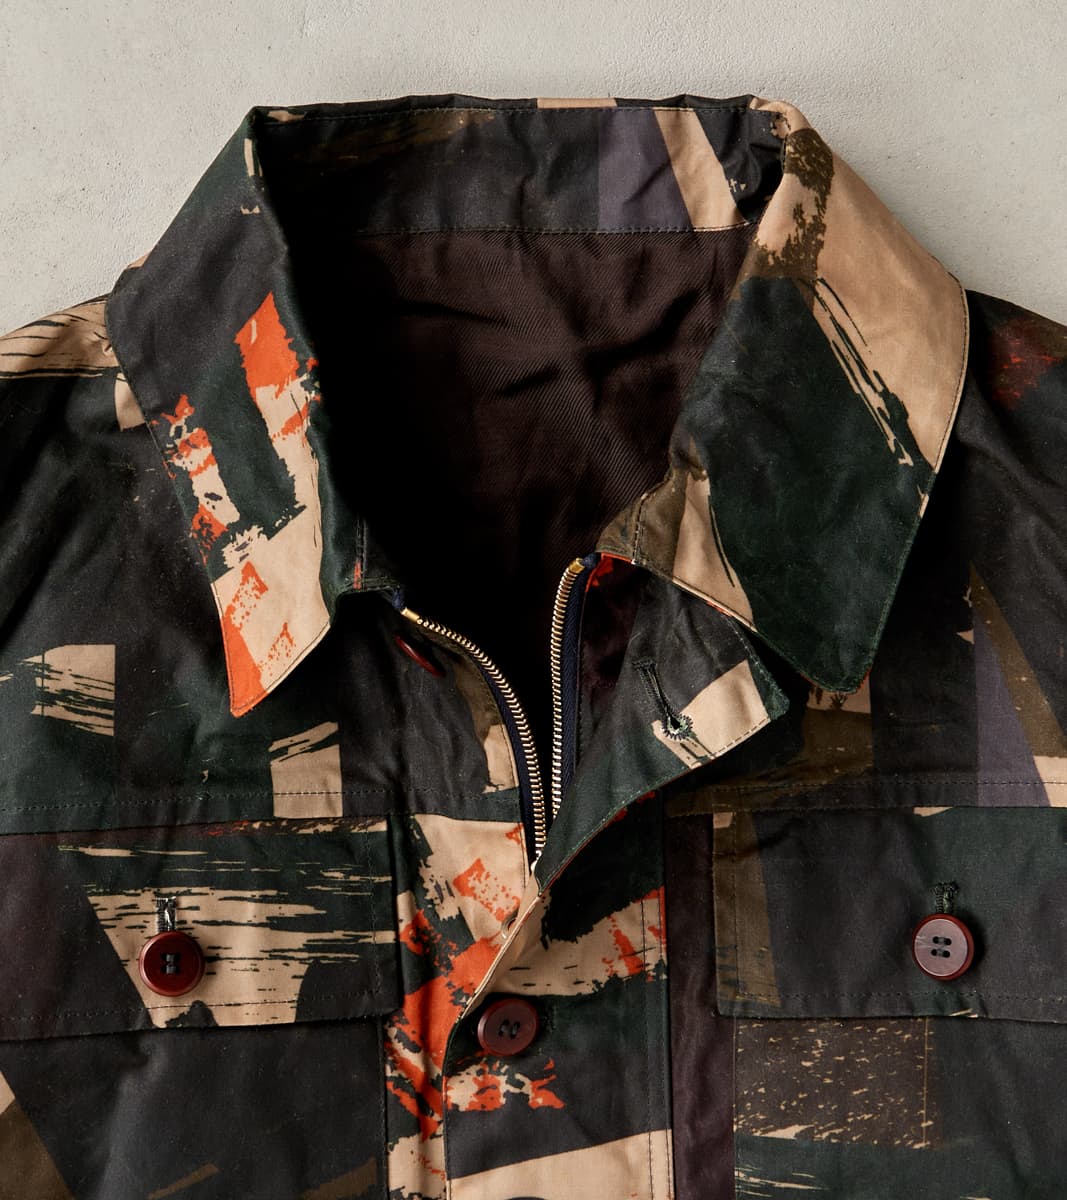 The Workers Club x Dr Field Jacket